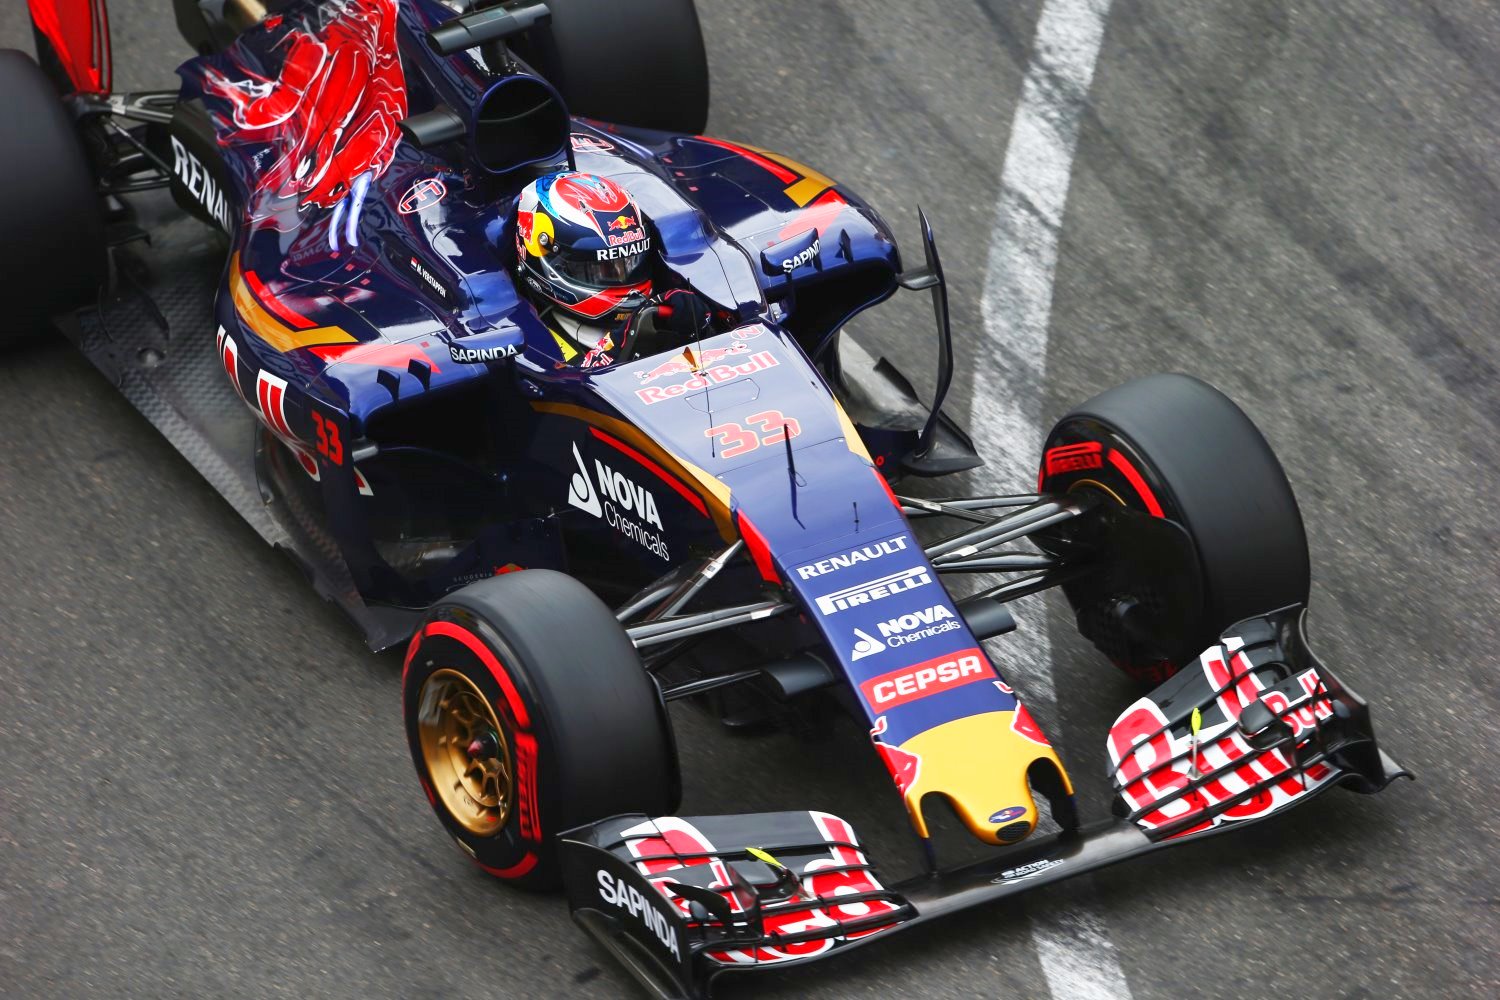 Max Verstappen will have year-old Ferrari engines in 2016